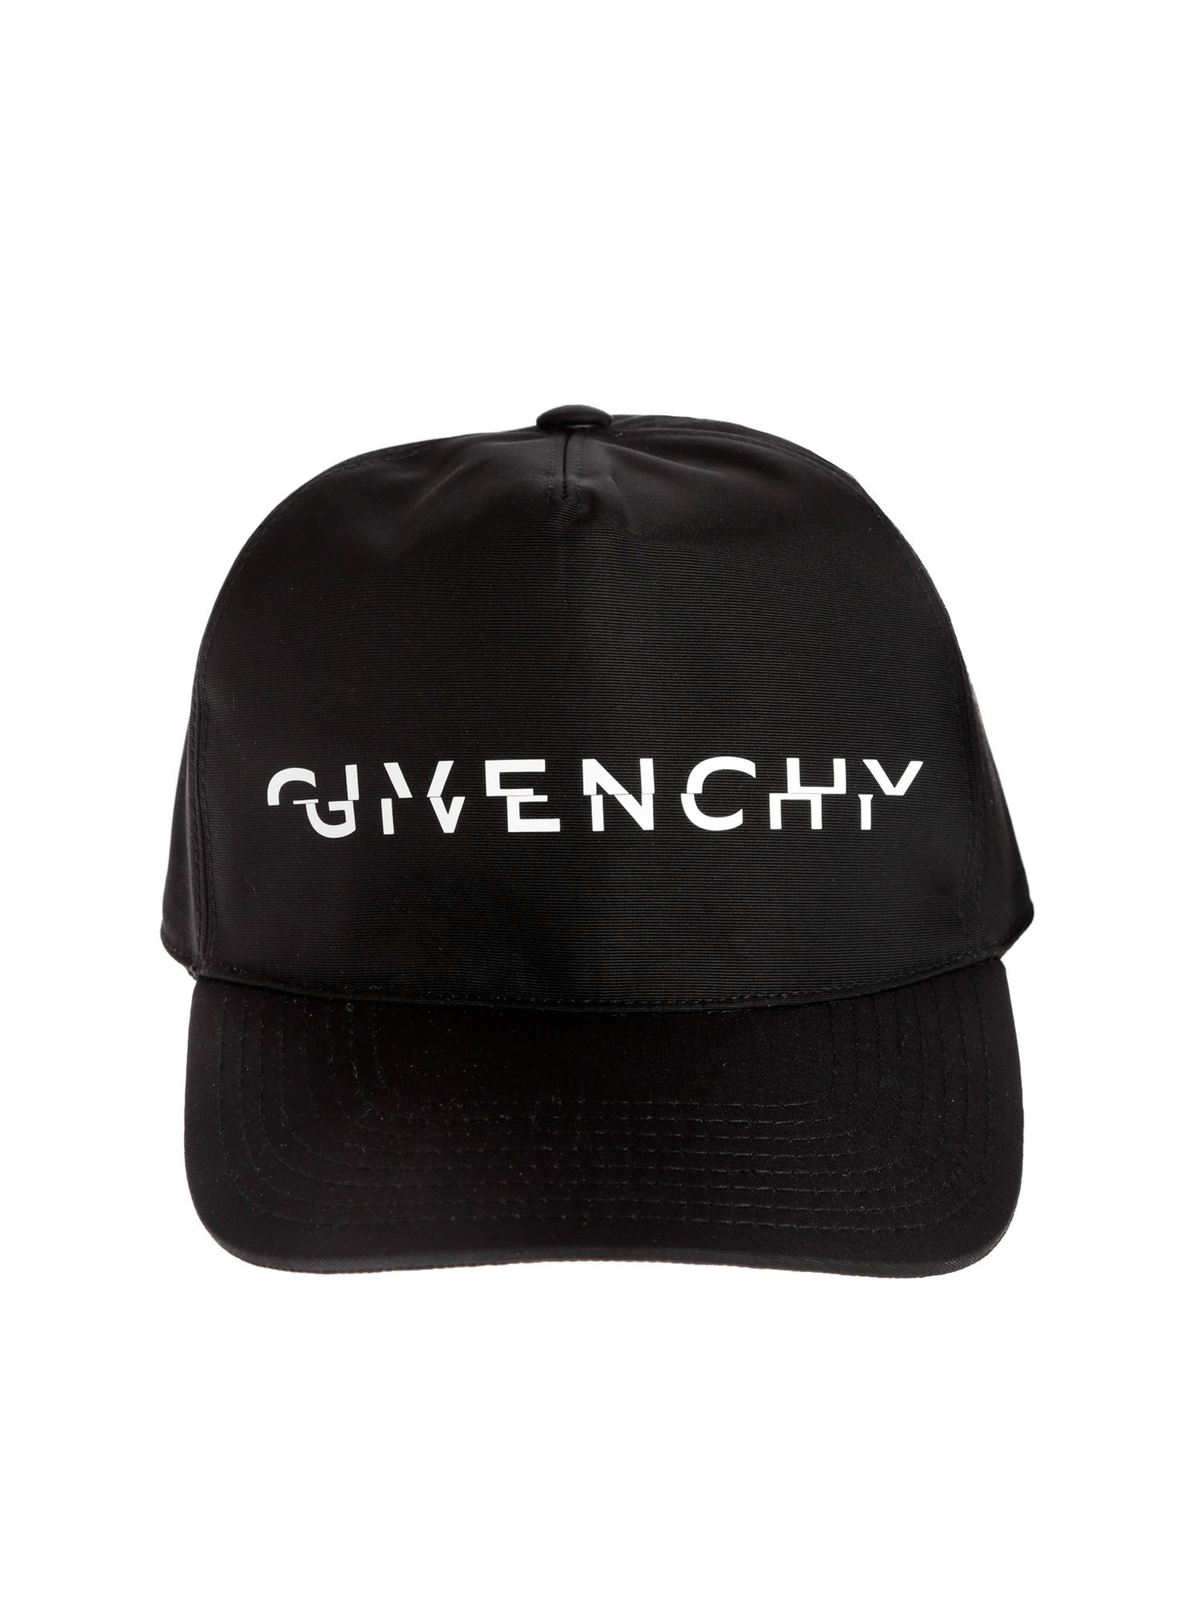 Beanies Givenchy - Givenchy Split cap in black - BPZ003P05A004 | iKRIX.com